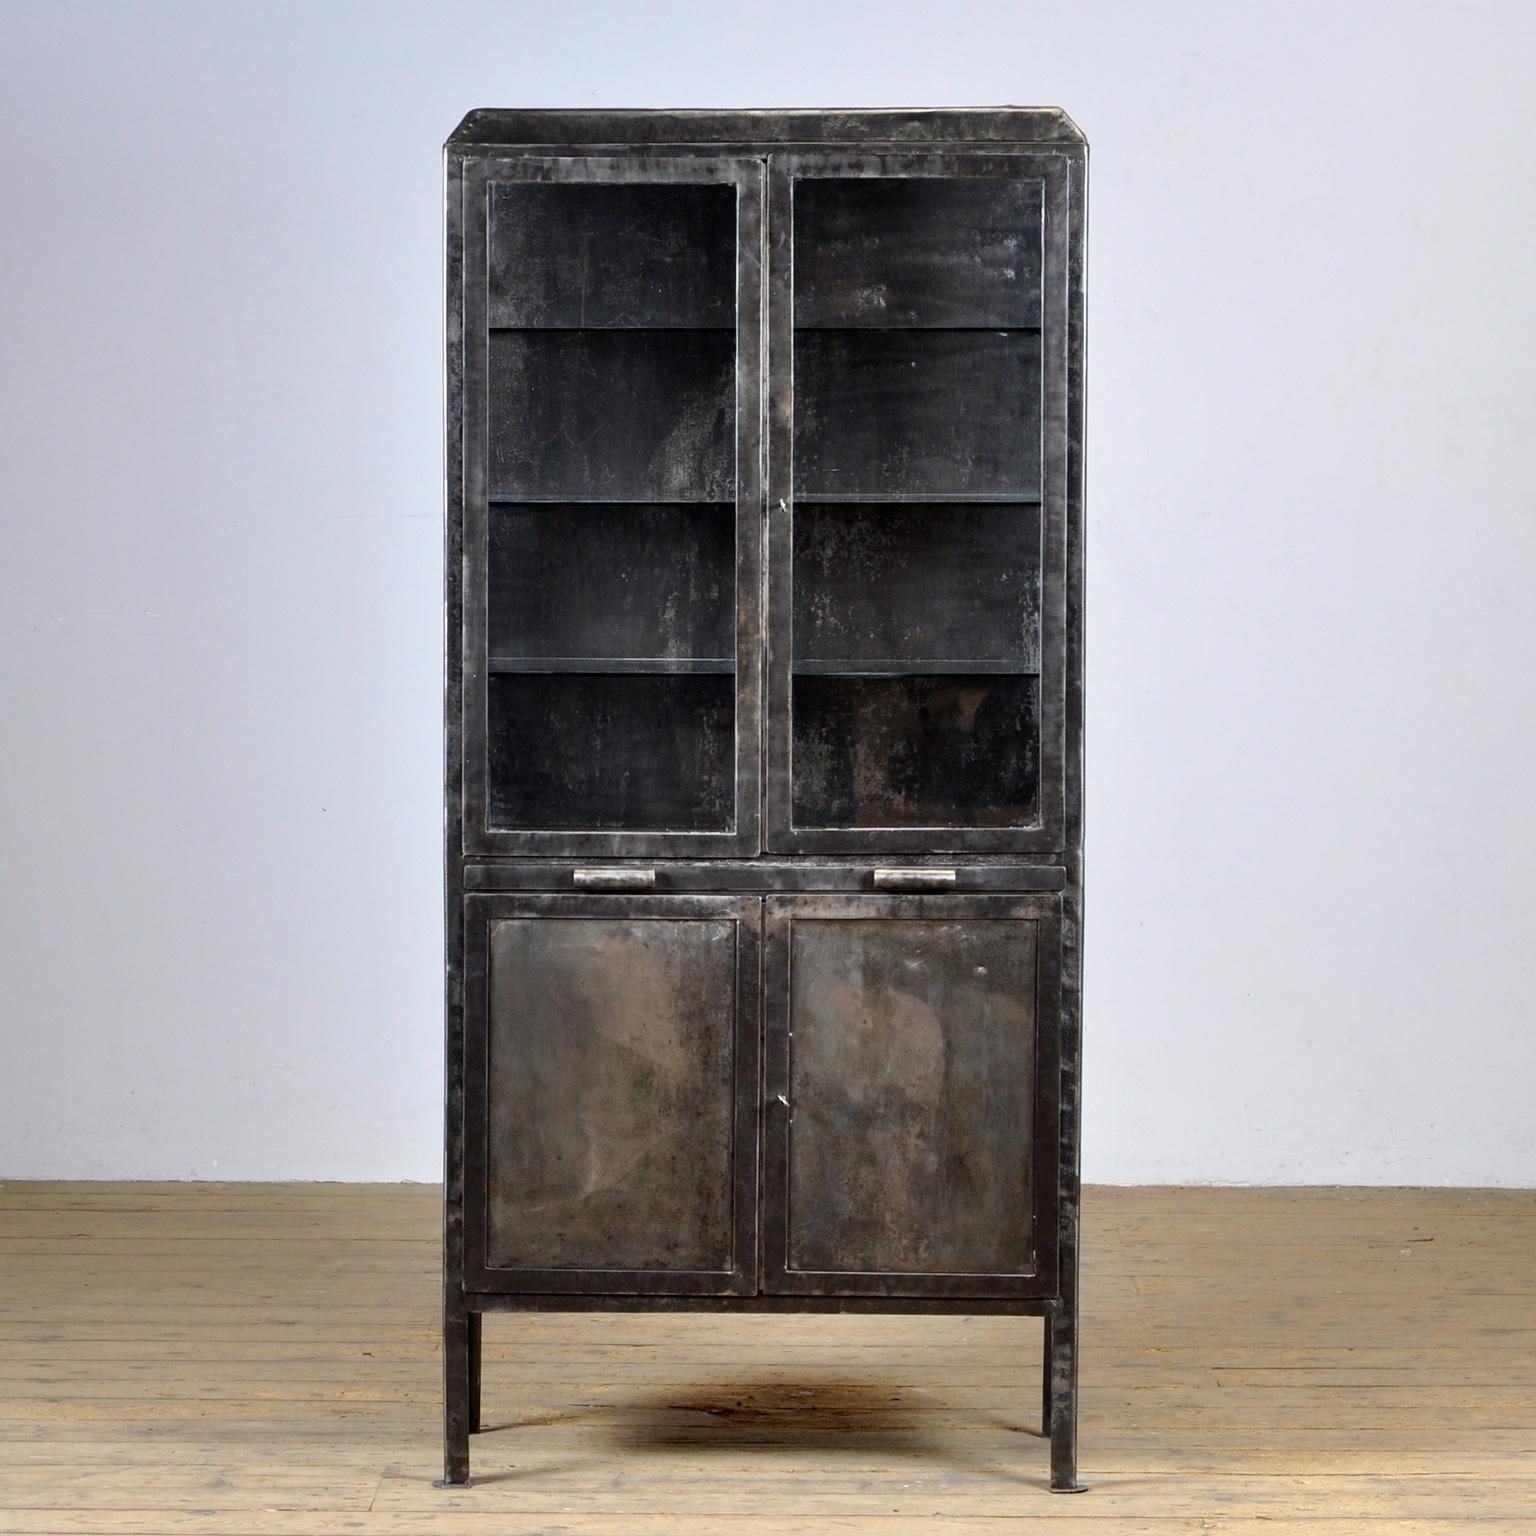 Medical cabinet from the 1930’s. The cabinet is produced in Hungary and is made of thick iron and glass. The locks are original and functional. The cabinet has been stripped to the metal and finished with a rust-resistant oil. The cabinet comes with